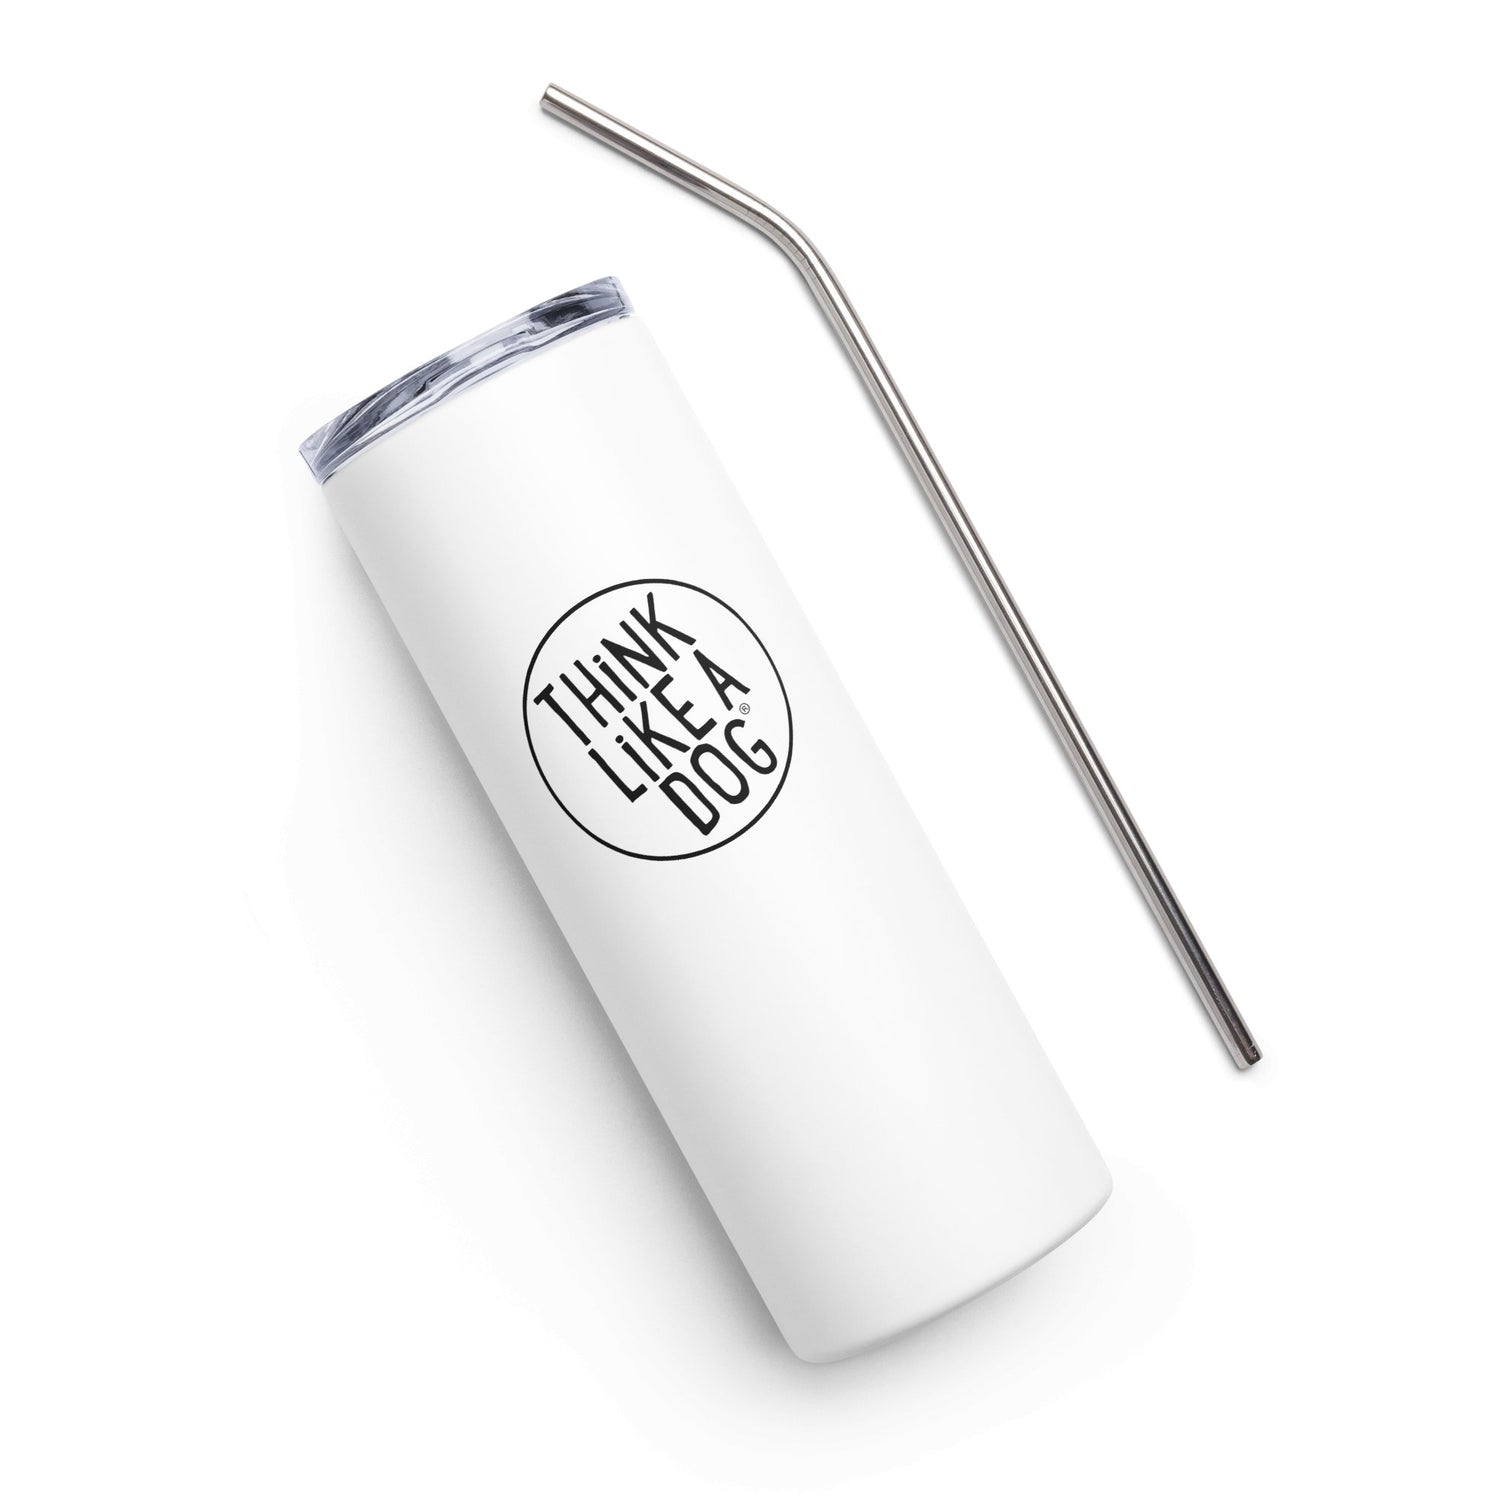 Stainless Steel Tumbler - THiNK LiKE A DOG®